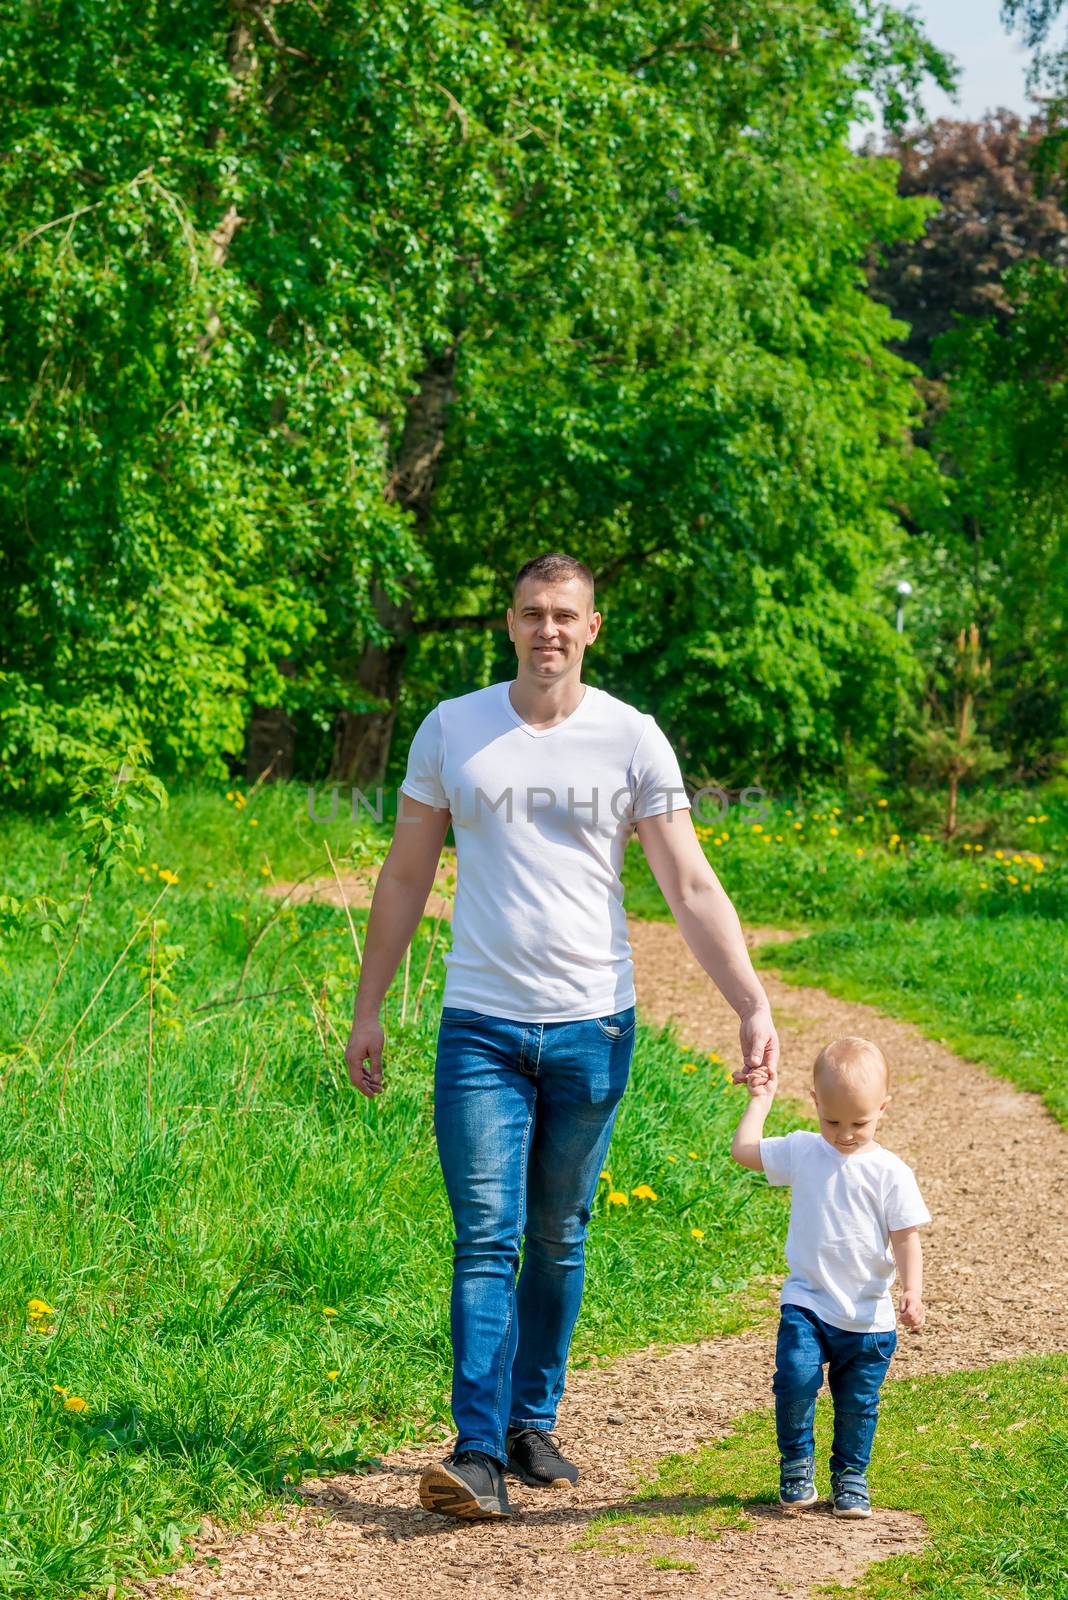 dad with his son for a walk in the park by kosmsos111